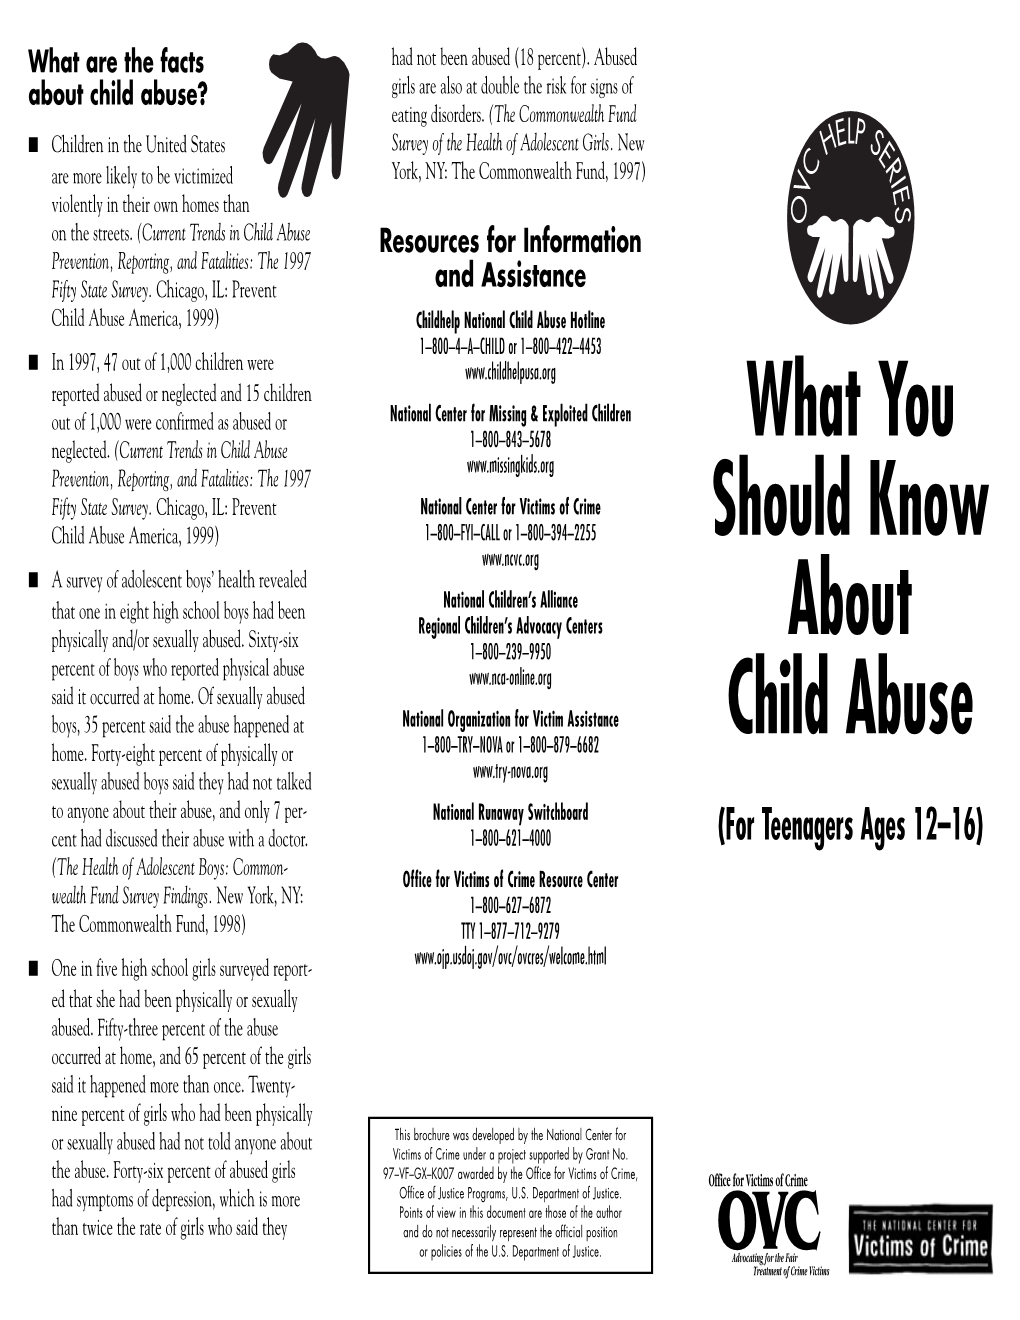 What You Should Know About Child Abuse